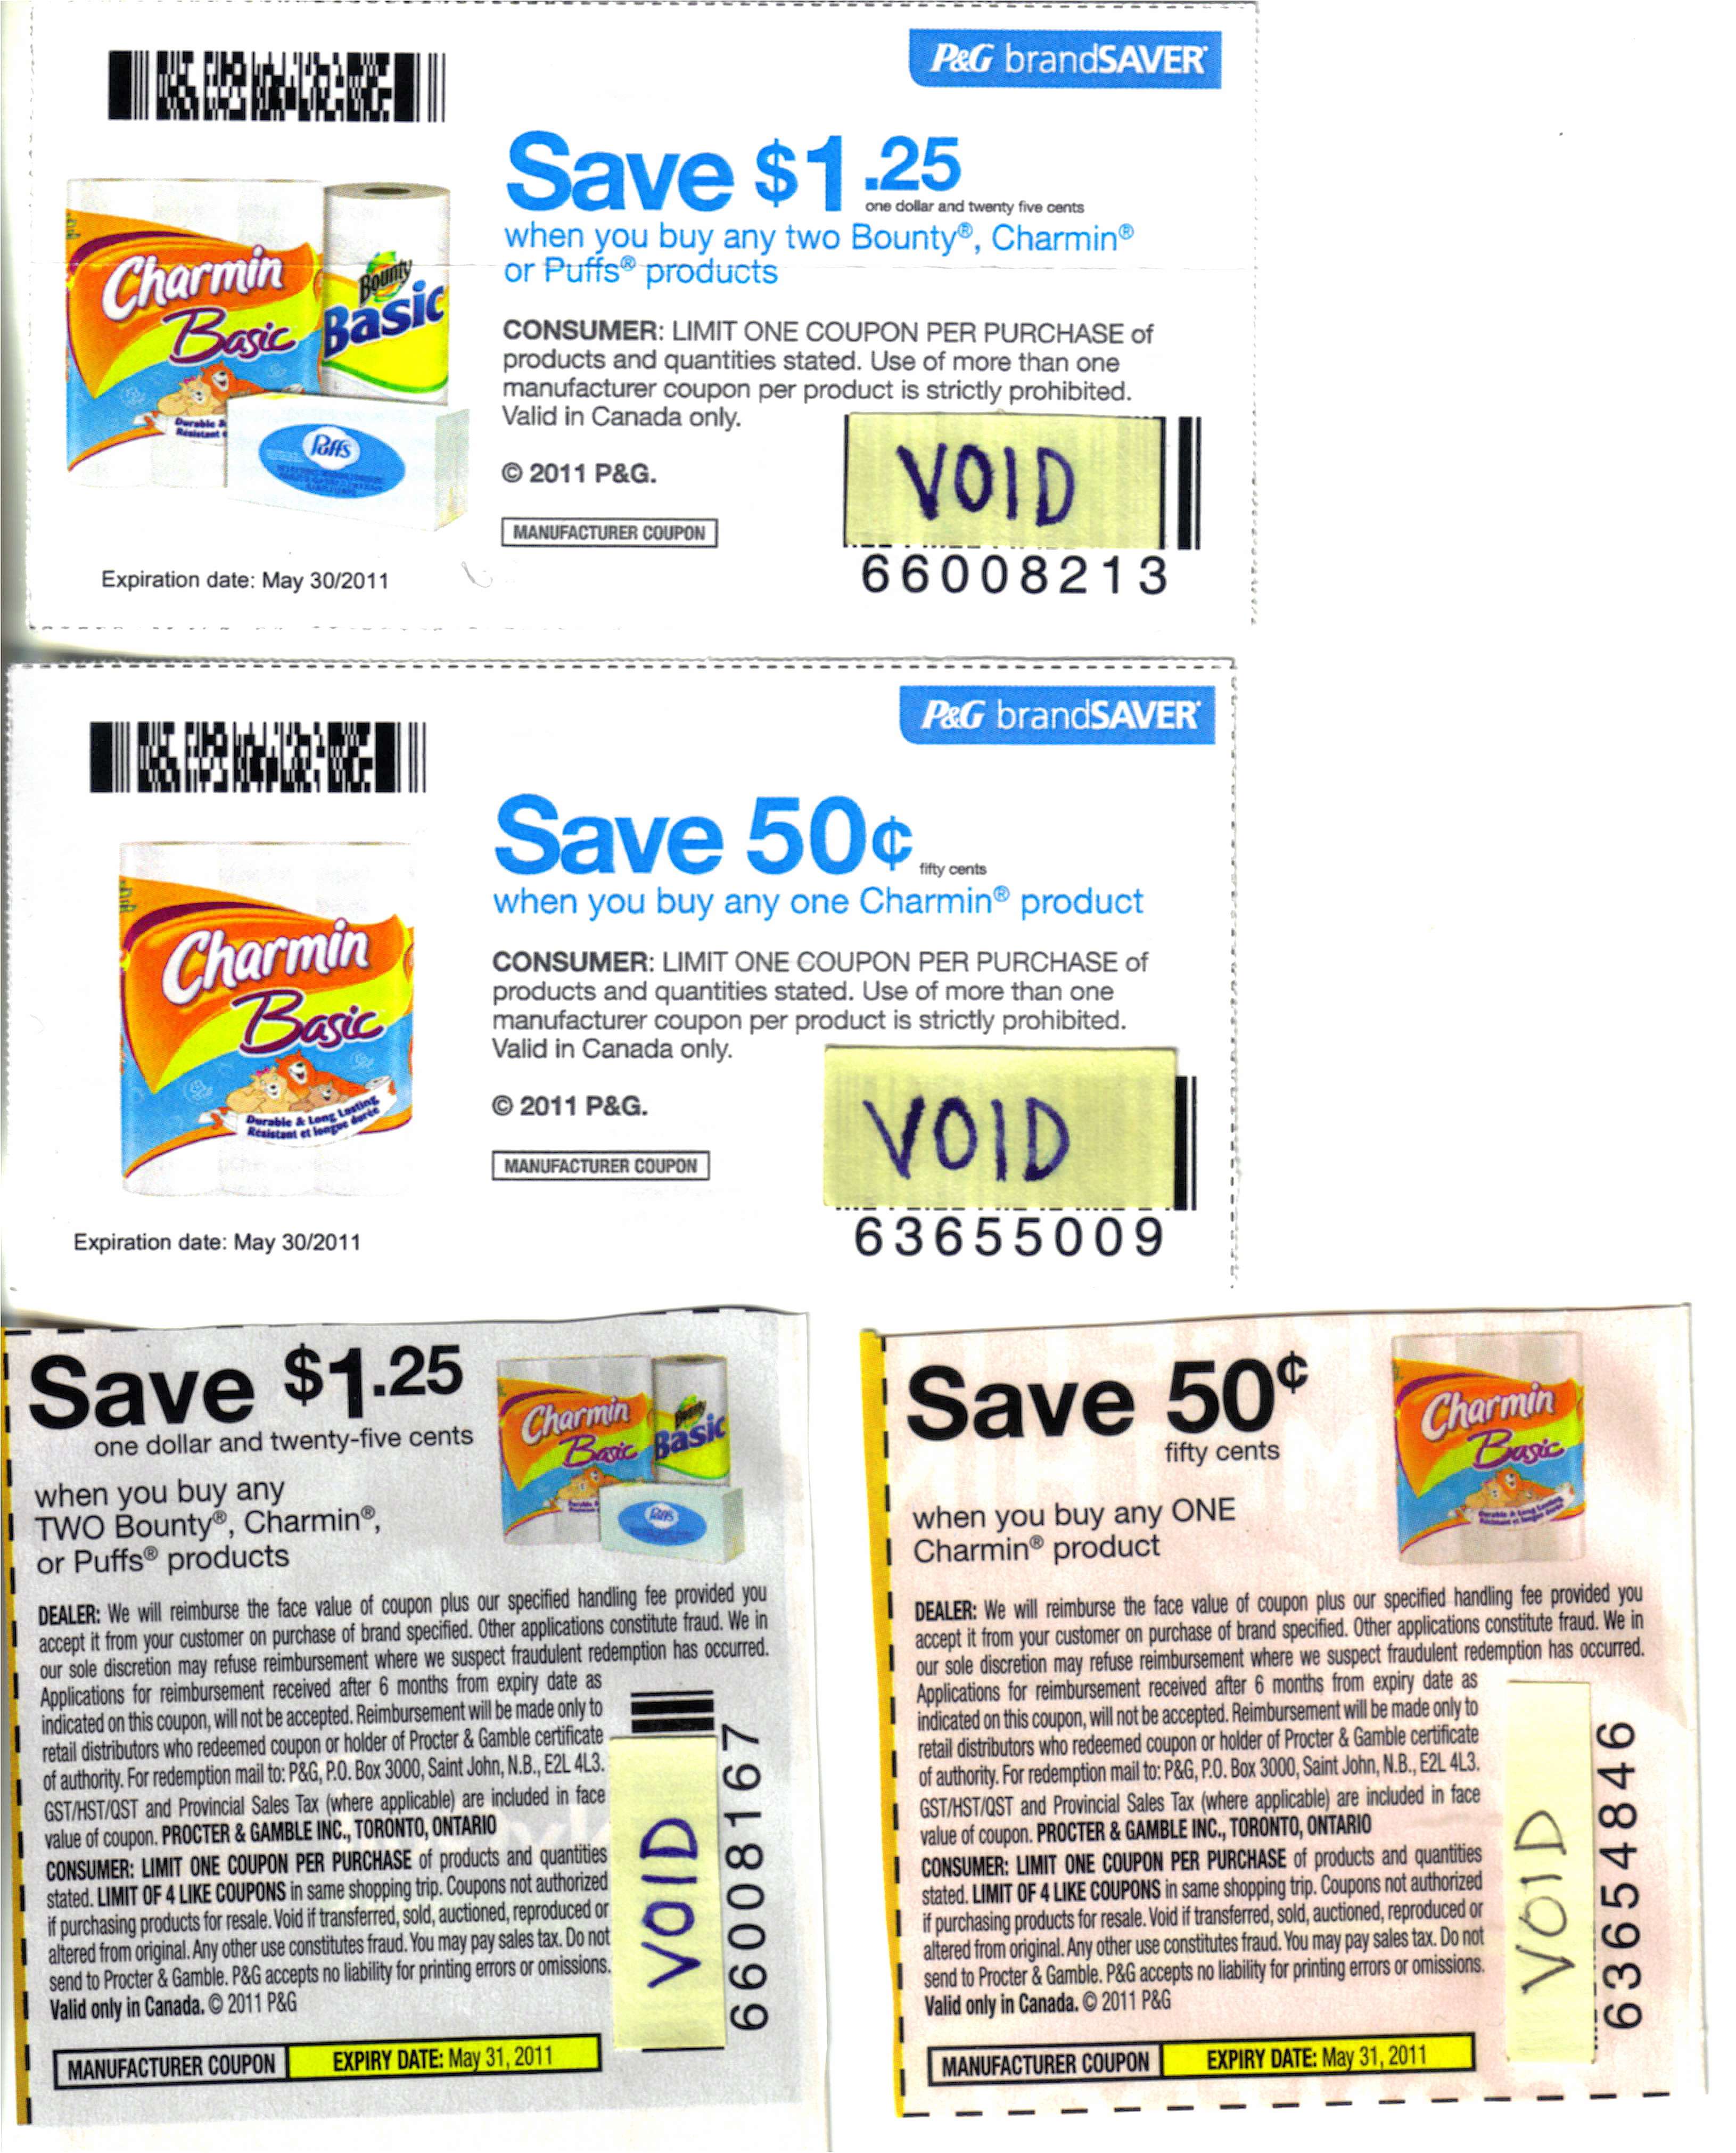 Toilet paper coupons?